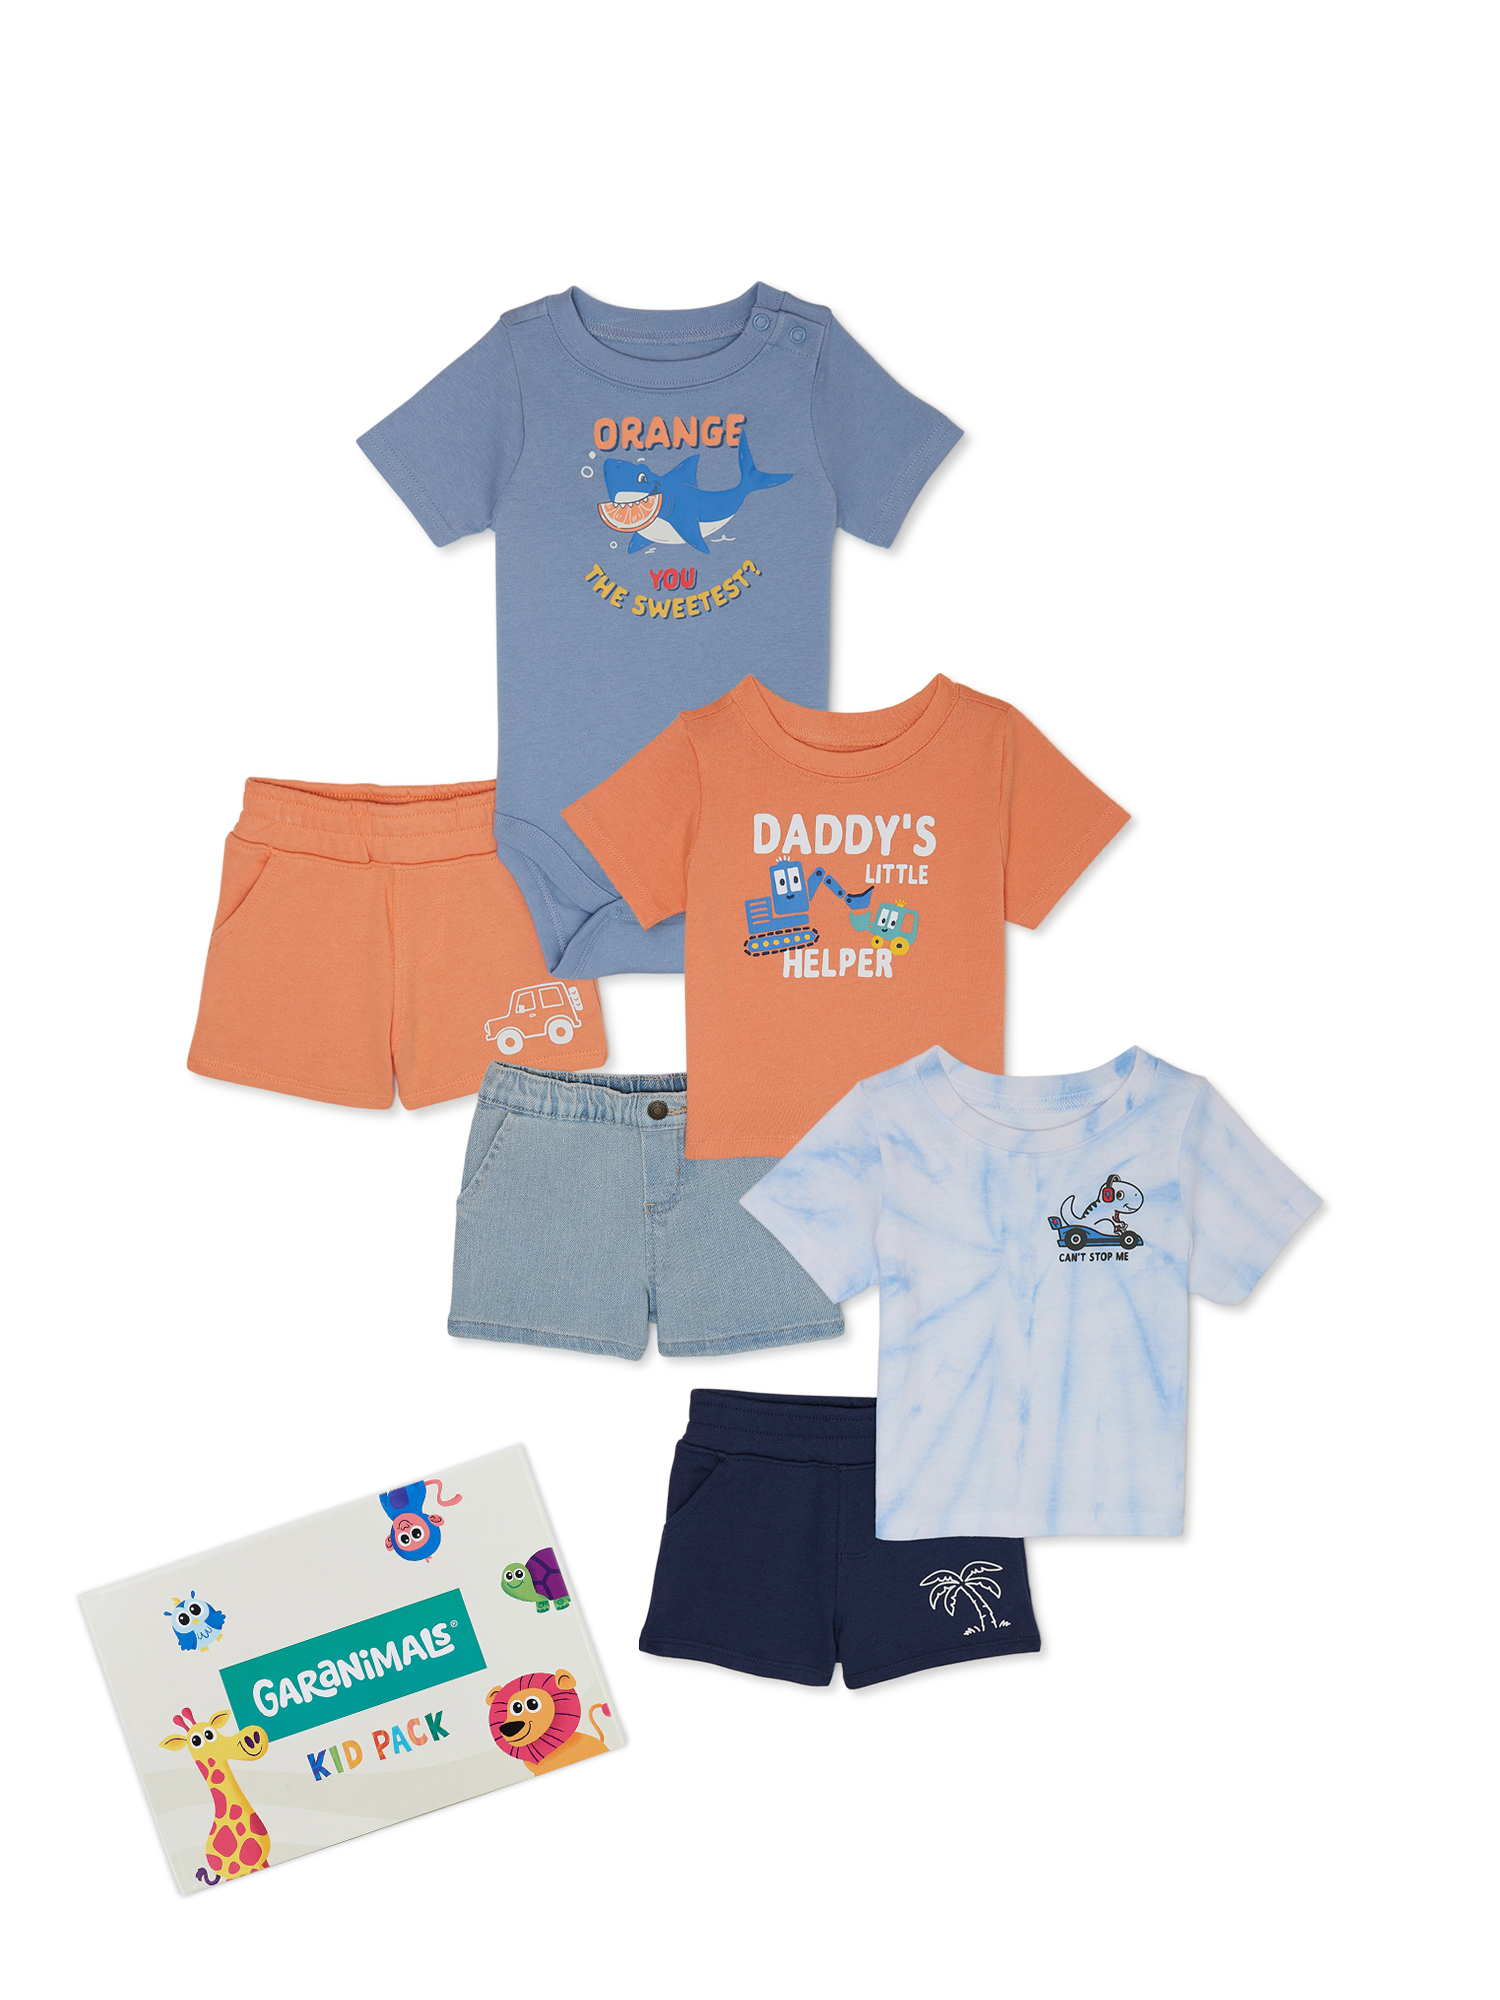 Garanimals Baby Boy Mix and Match Outfit Kid-Pack, 6-Piece, Sizes 0-24 Months - image 1 of 6